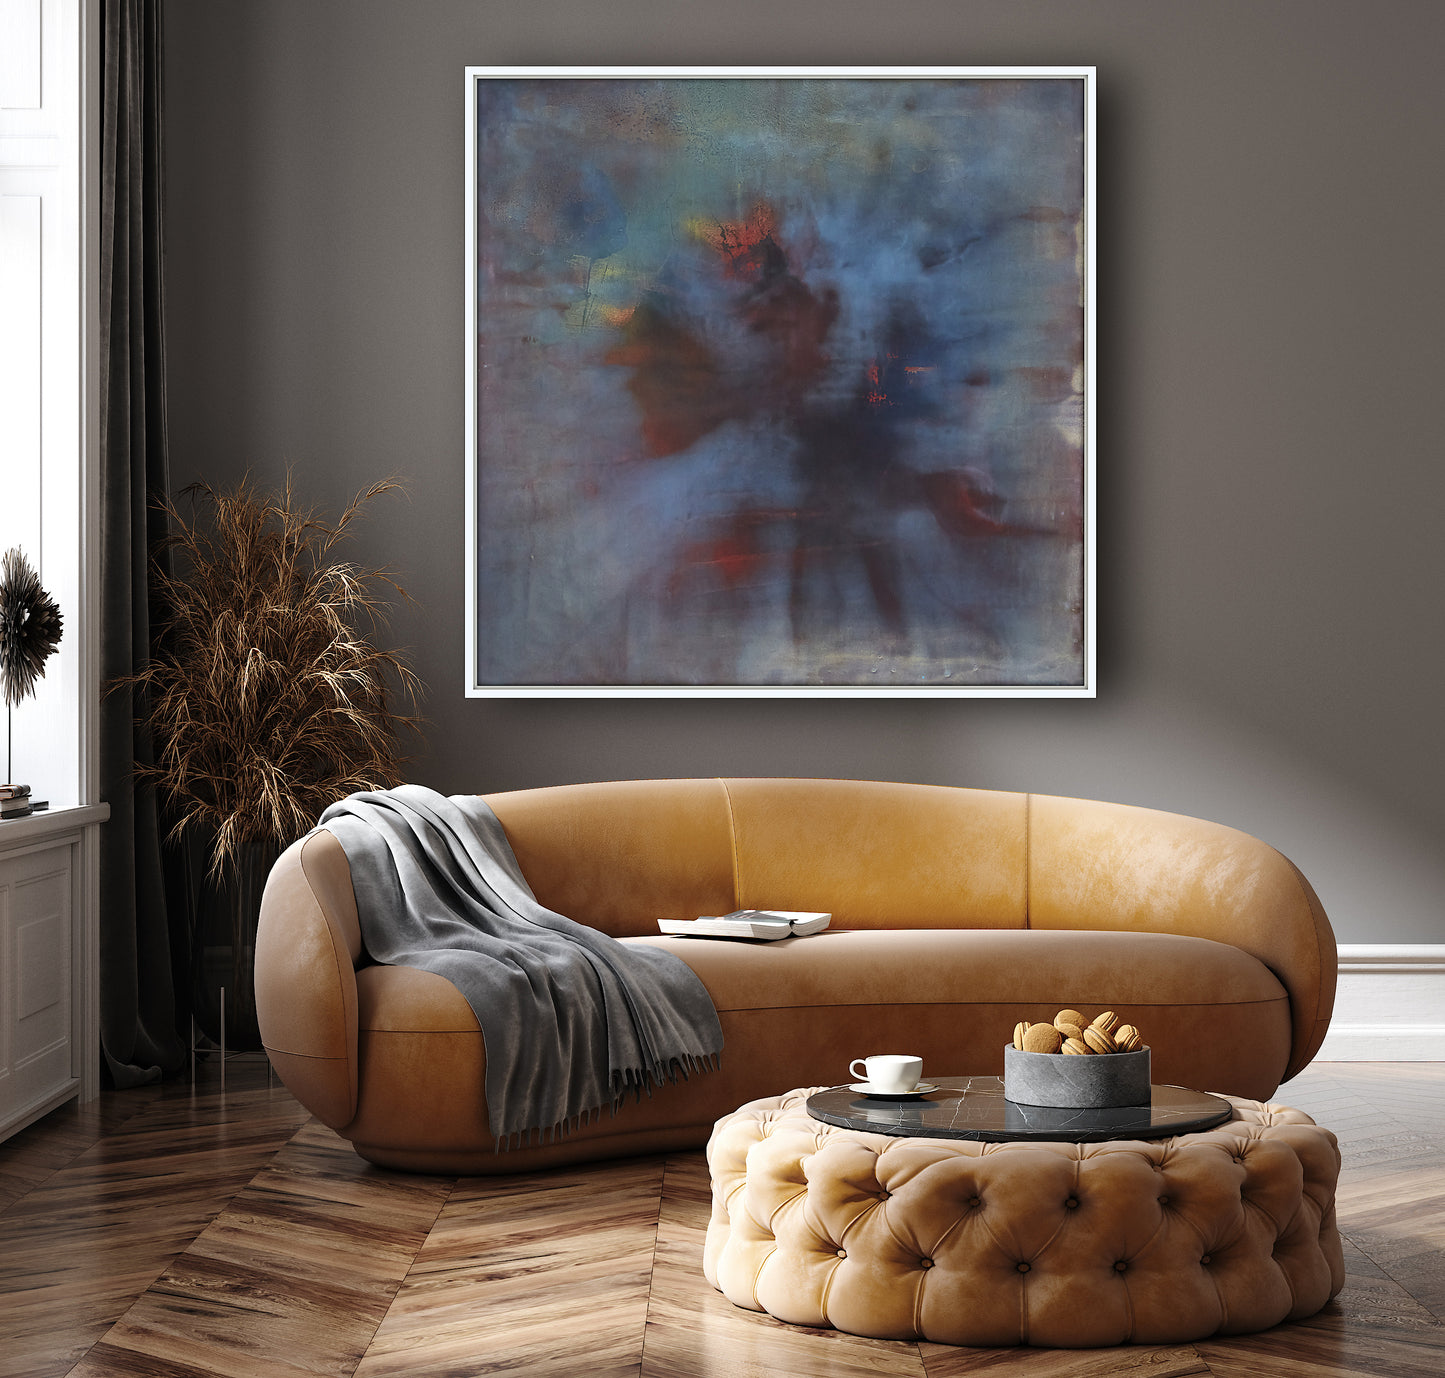 Smoke & Fire | Giclee Print on Gallery-Wrapped Stretched Canvas